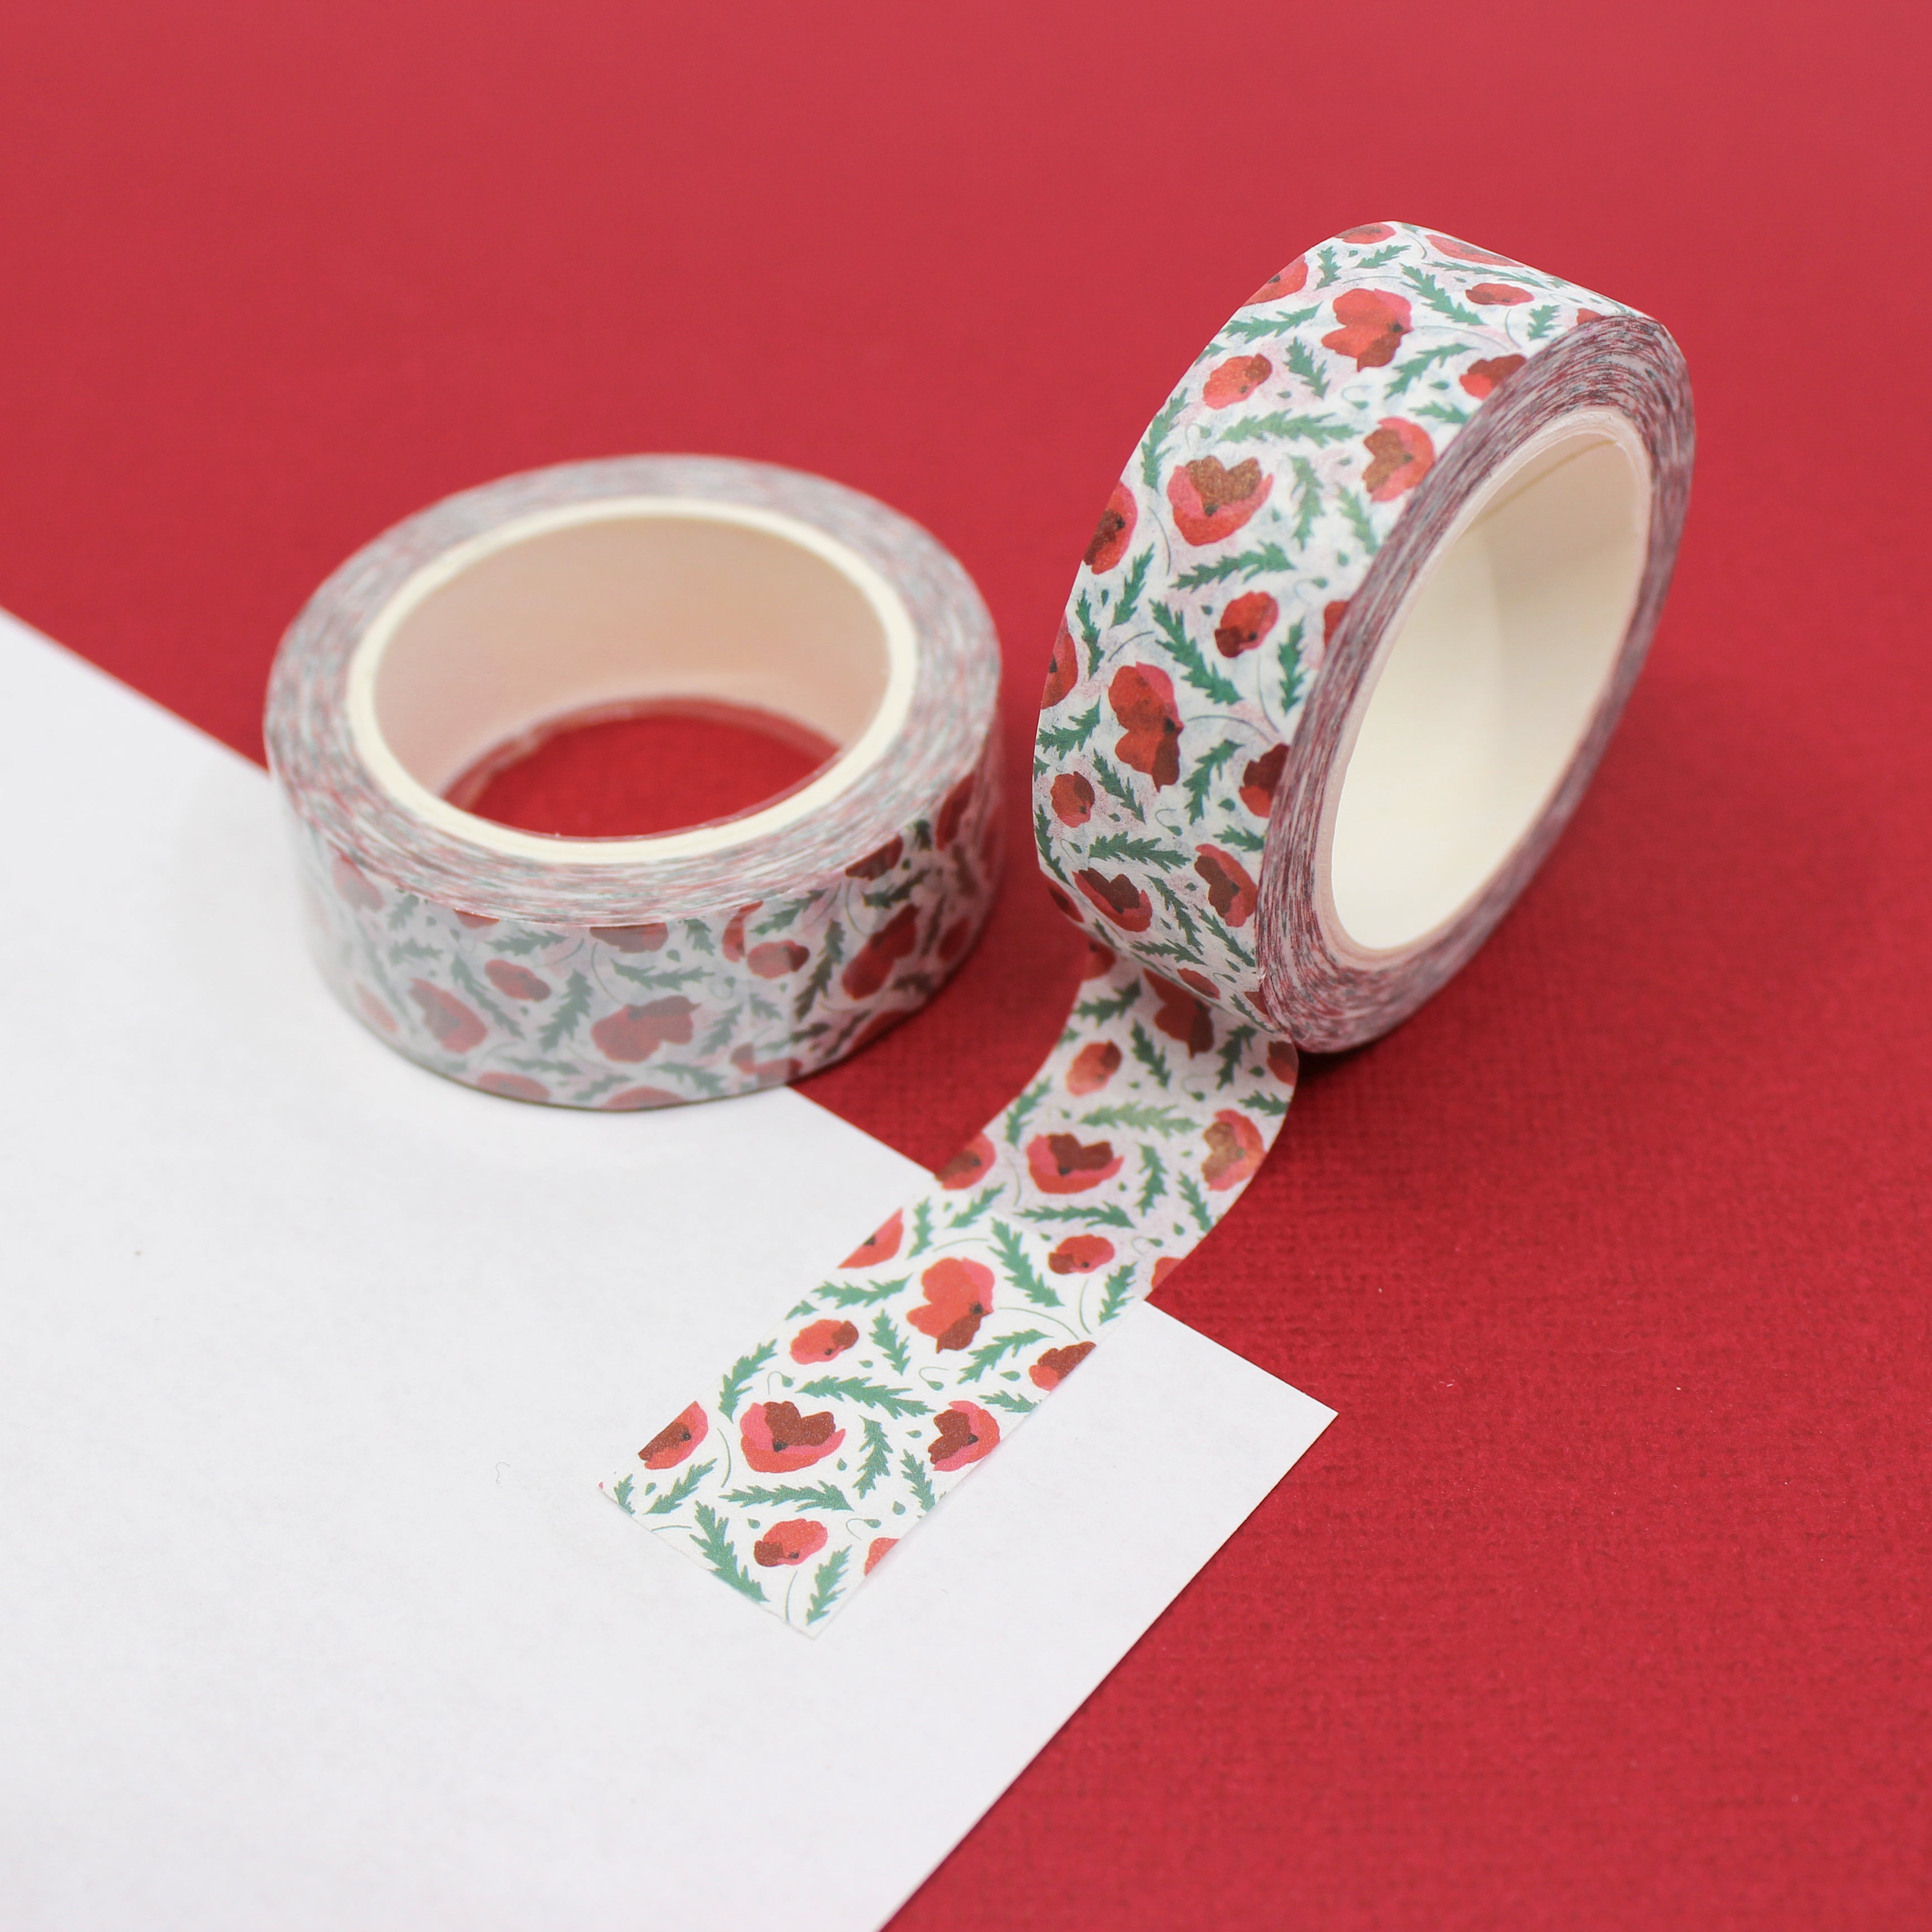 Beautiful Red Amaryllis Holiday Flower Washi Tape from BBB Supplies Craft Shop